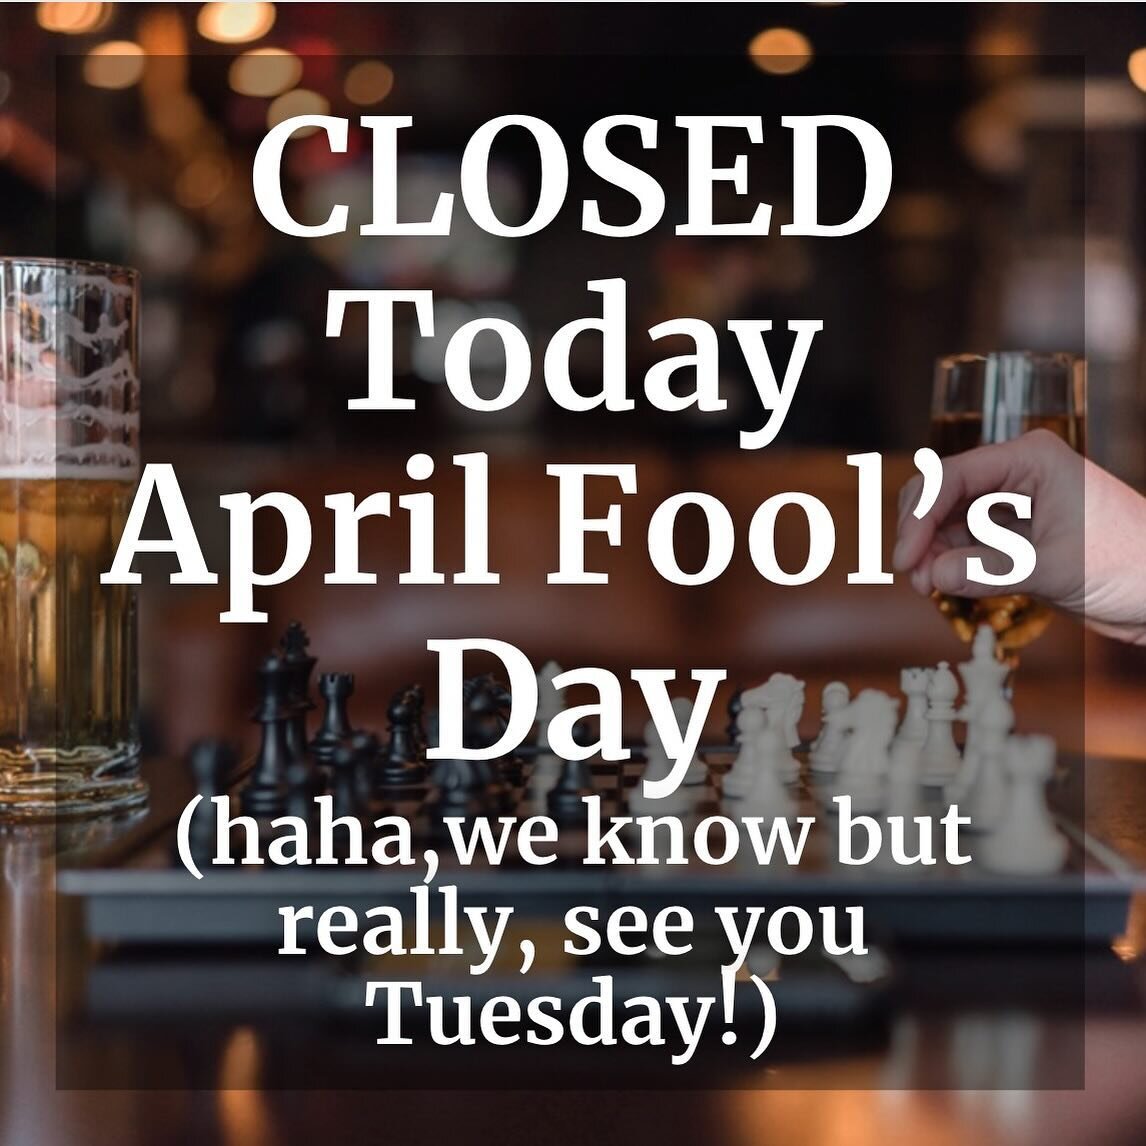 This is no April Fools joke! We are giving our staff a little breather after a big month.

We will be open tomorrow at 11a for some cold pints and Taco Tuesday from @fredbeansandrice! 

Cheers, friends! 

#knoxfoodie #localcraftbeer #supportlocal #no